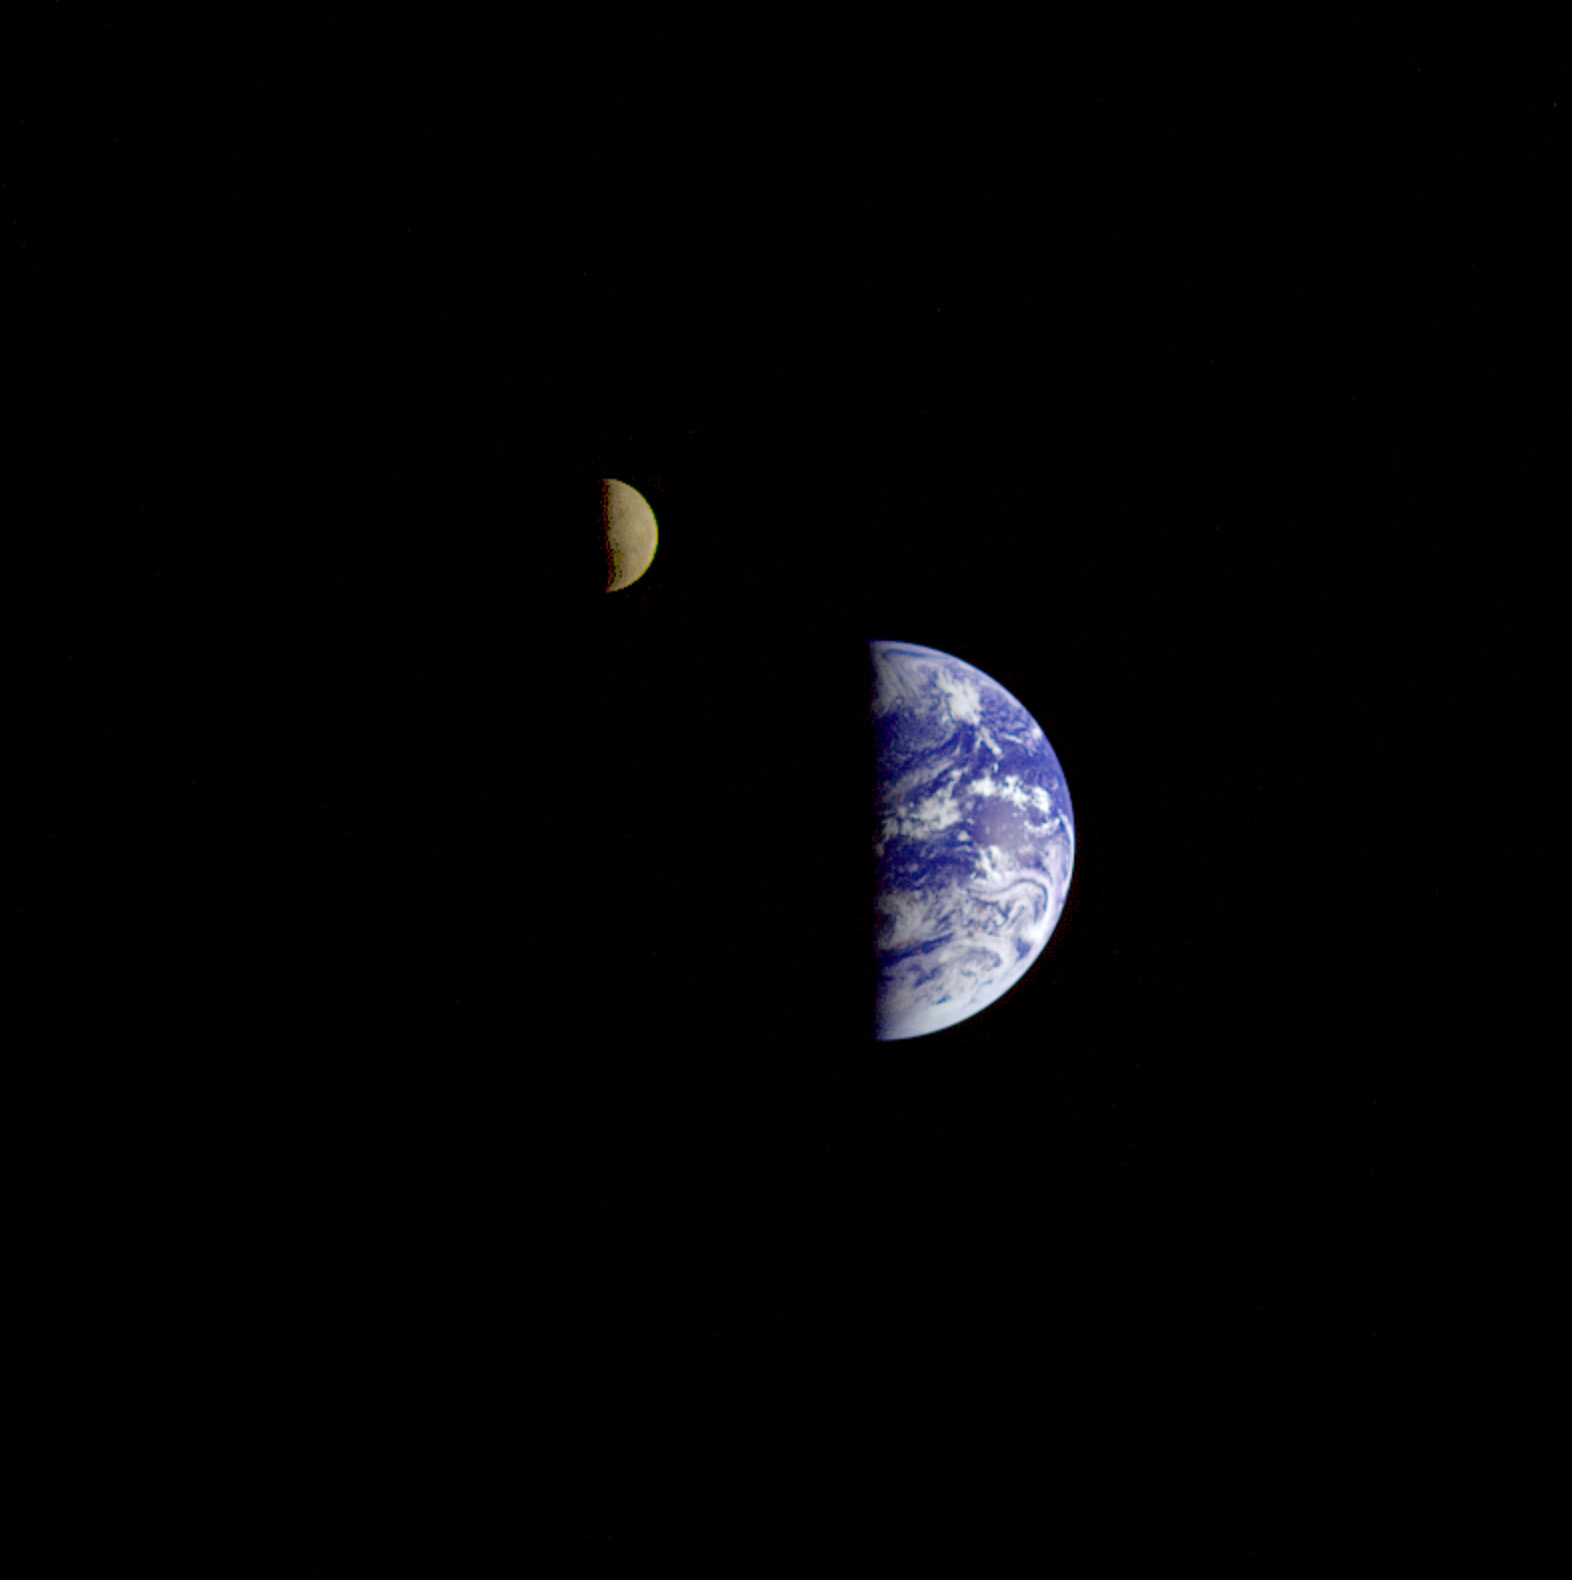 Eight days after its final encounter with the Earth, the Galileo spacecraft looked back and captured this remarkable view of the Earth and Moon.